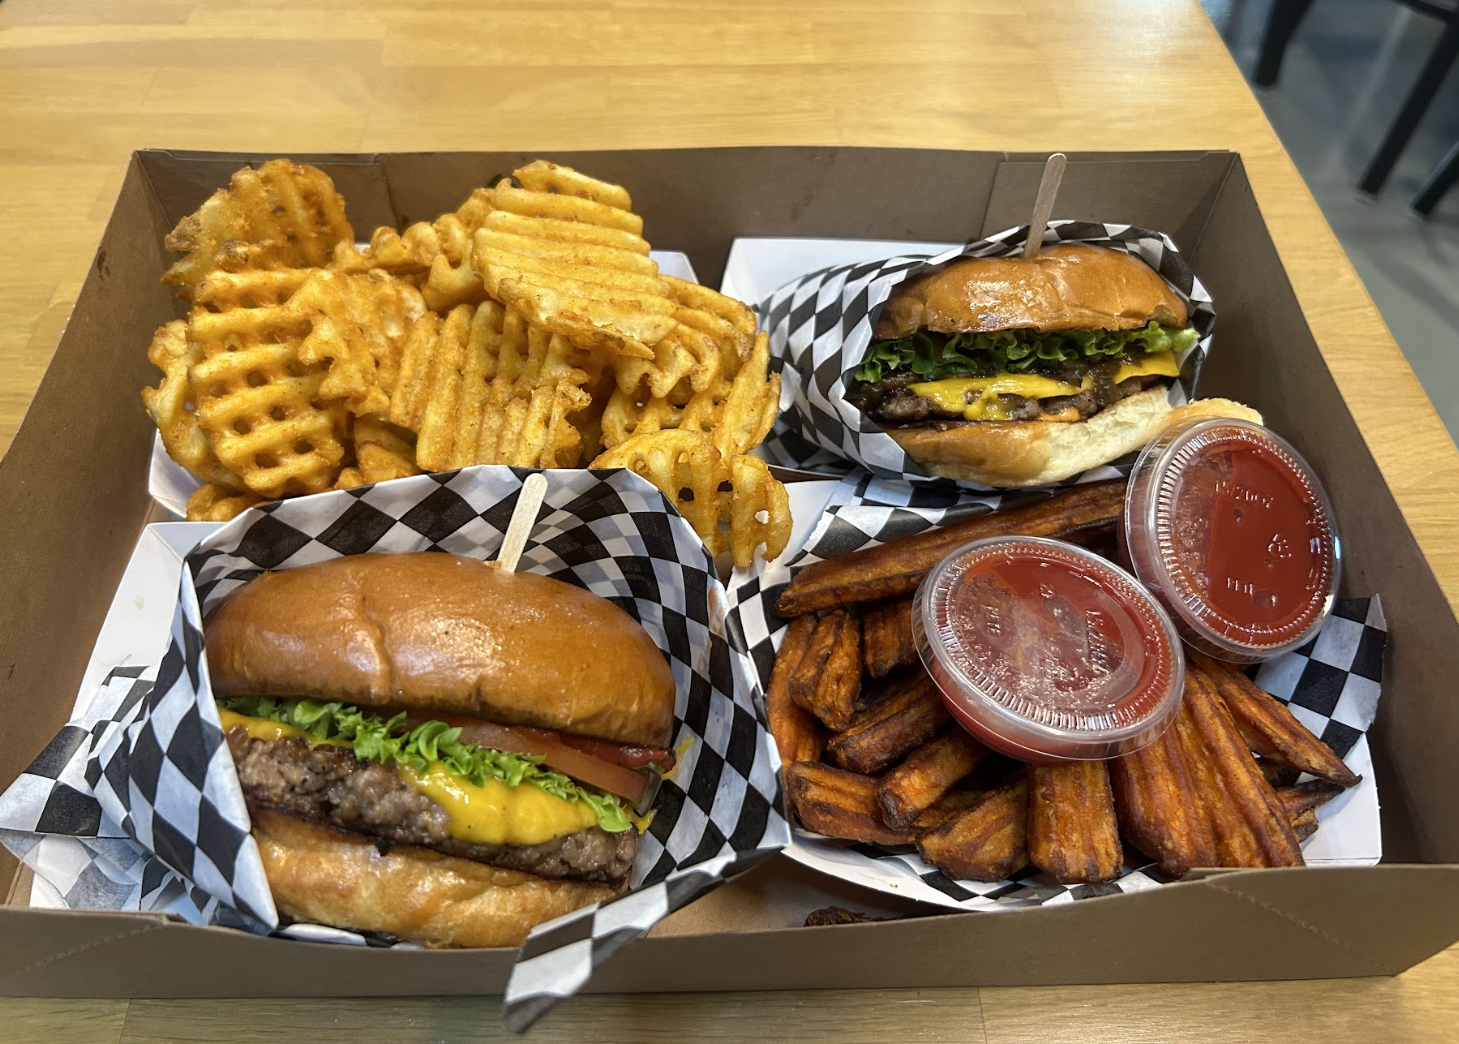 Planet Vegan offers a variety of vegan eats from burgers to fries with Beyond meat on top.